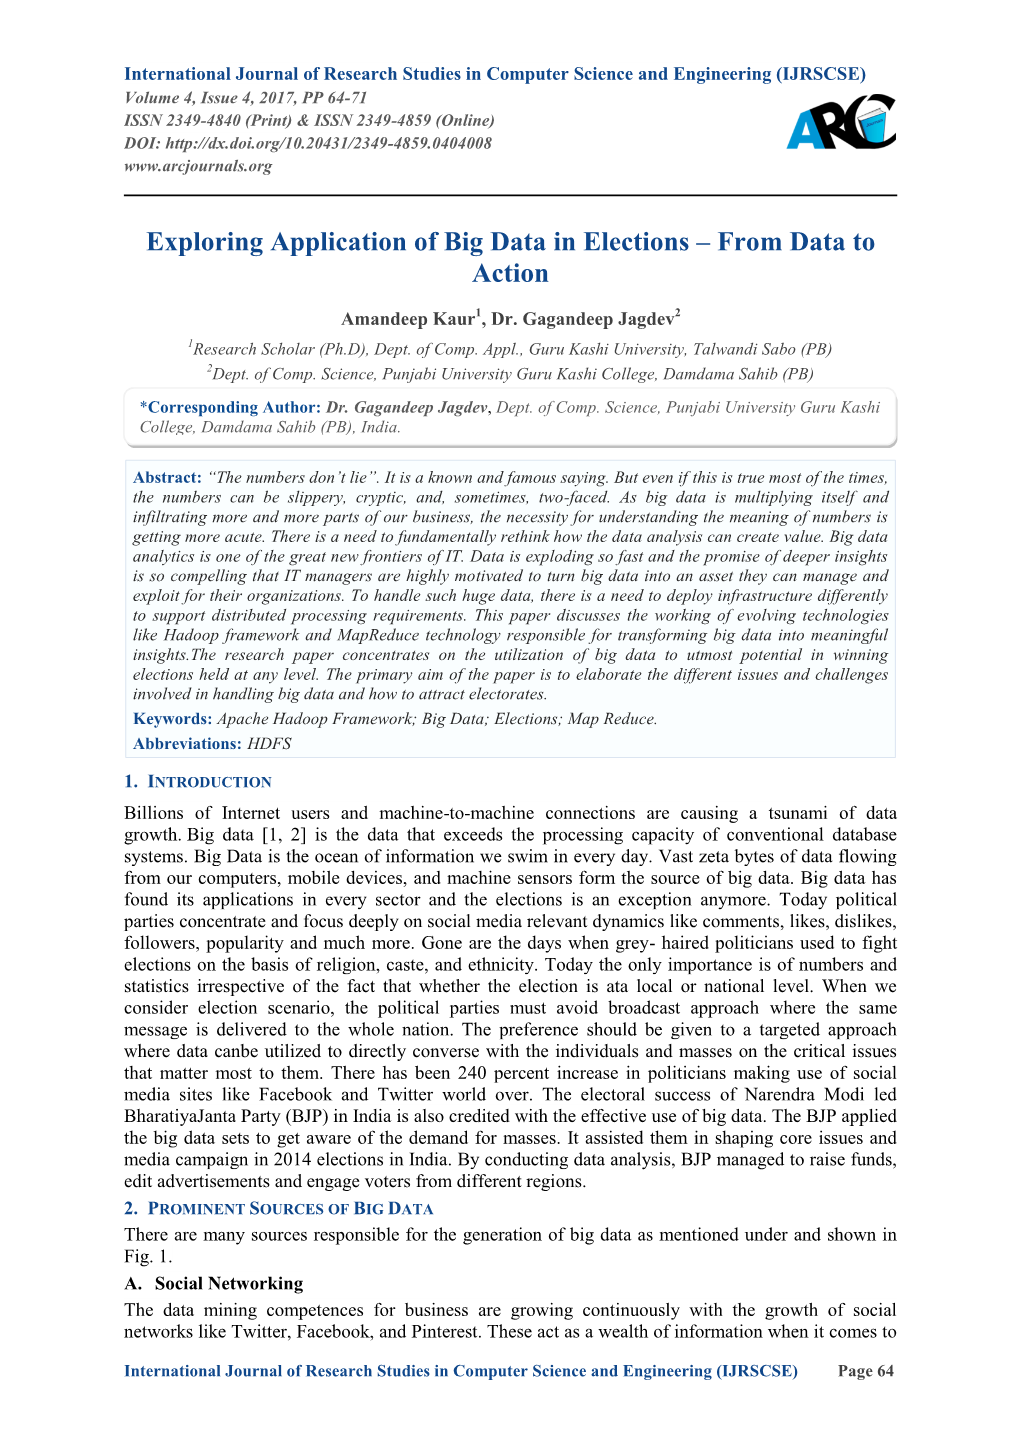 Exploring Application of Big Data in Elections – from Data to Action